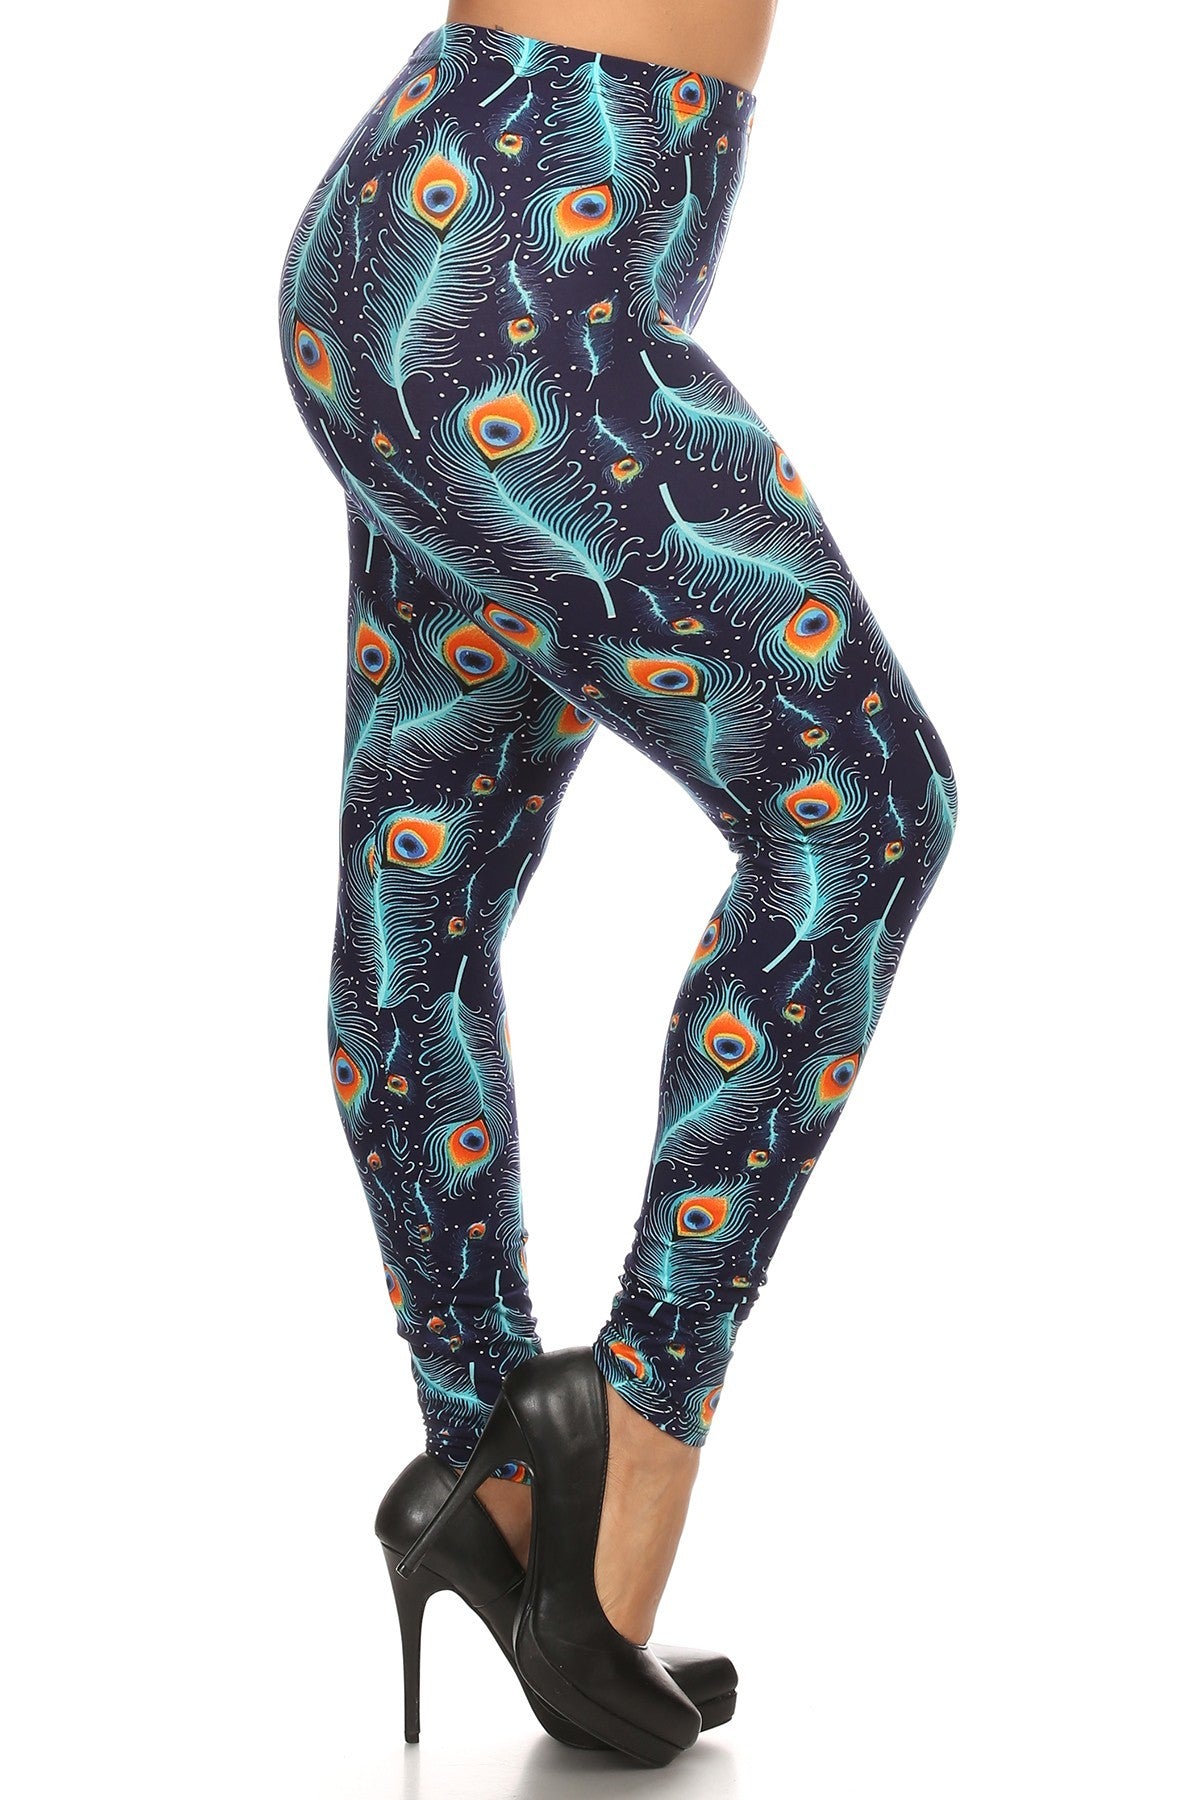 Plus Print, Full Length Leggings In A Slim Fitting Style With A Banded High Waist